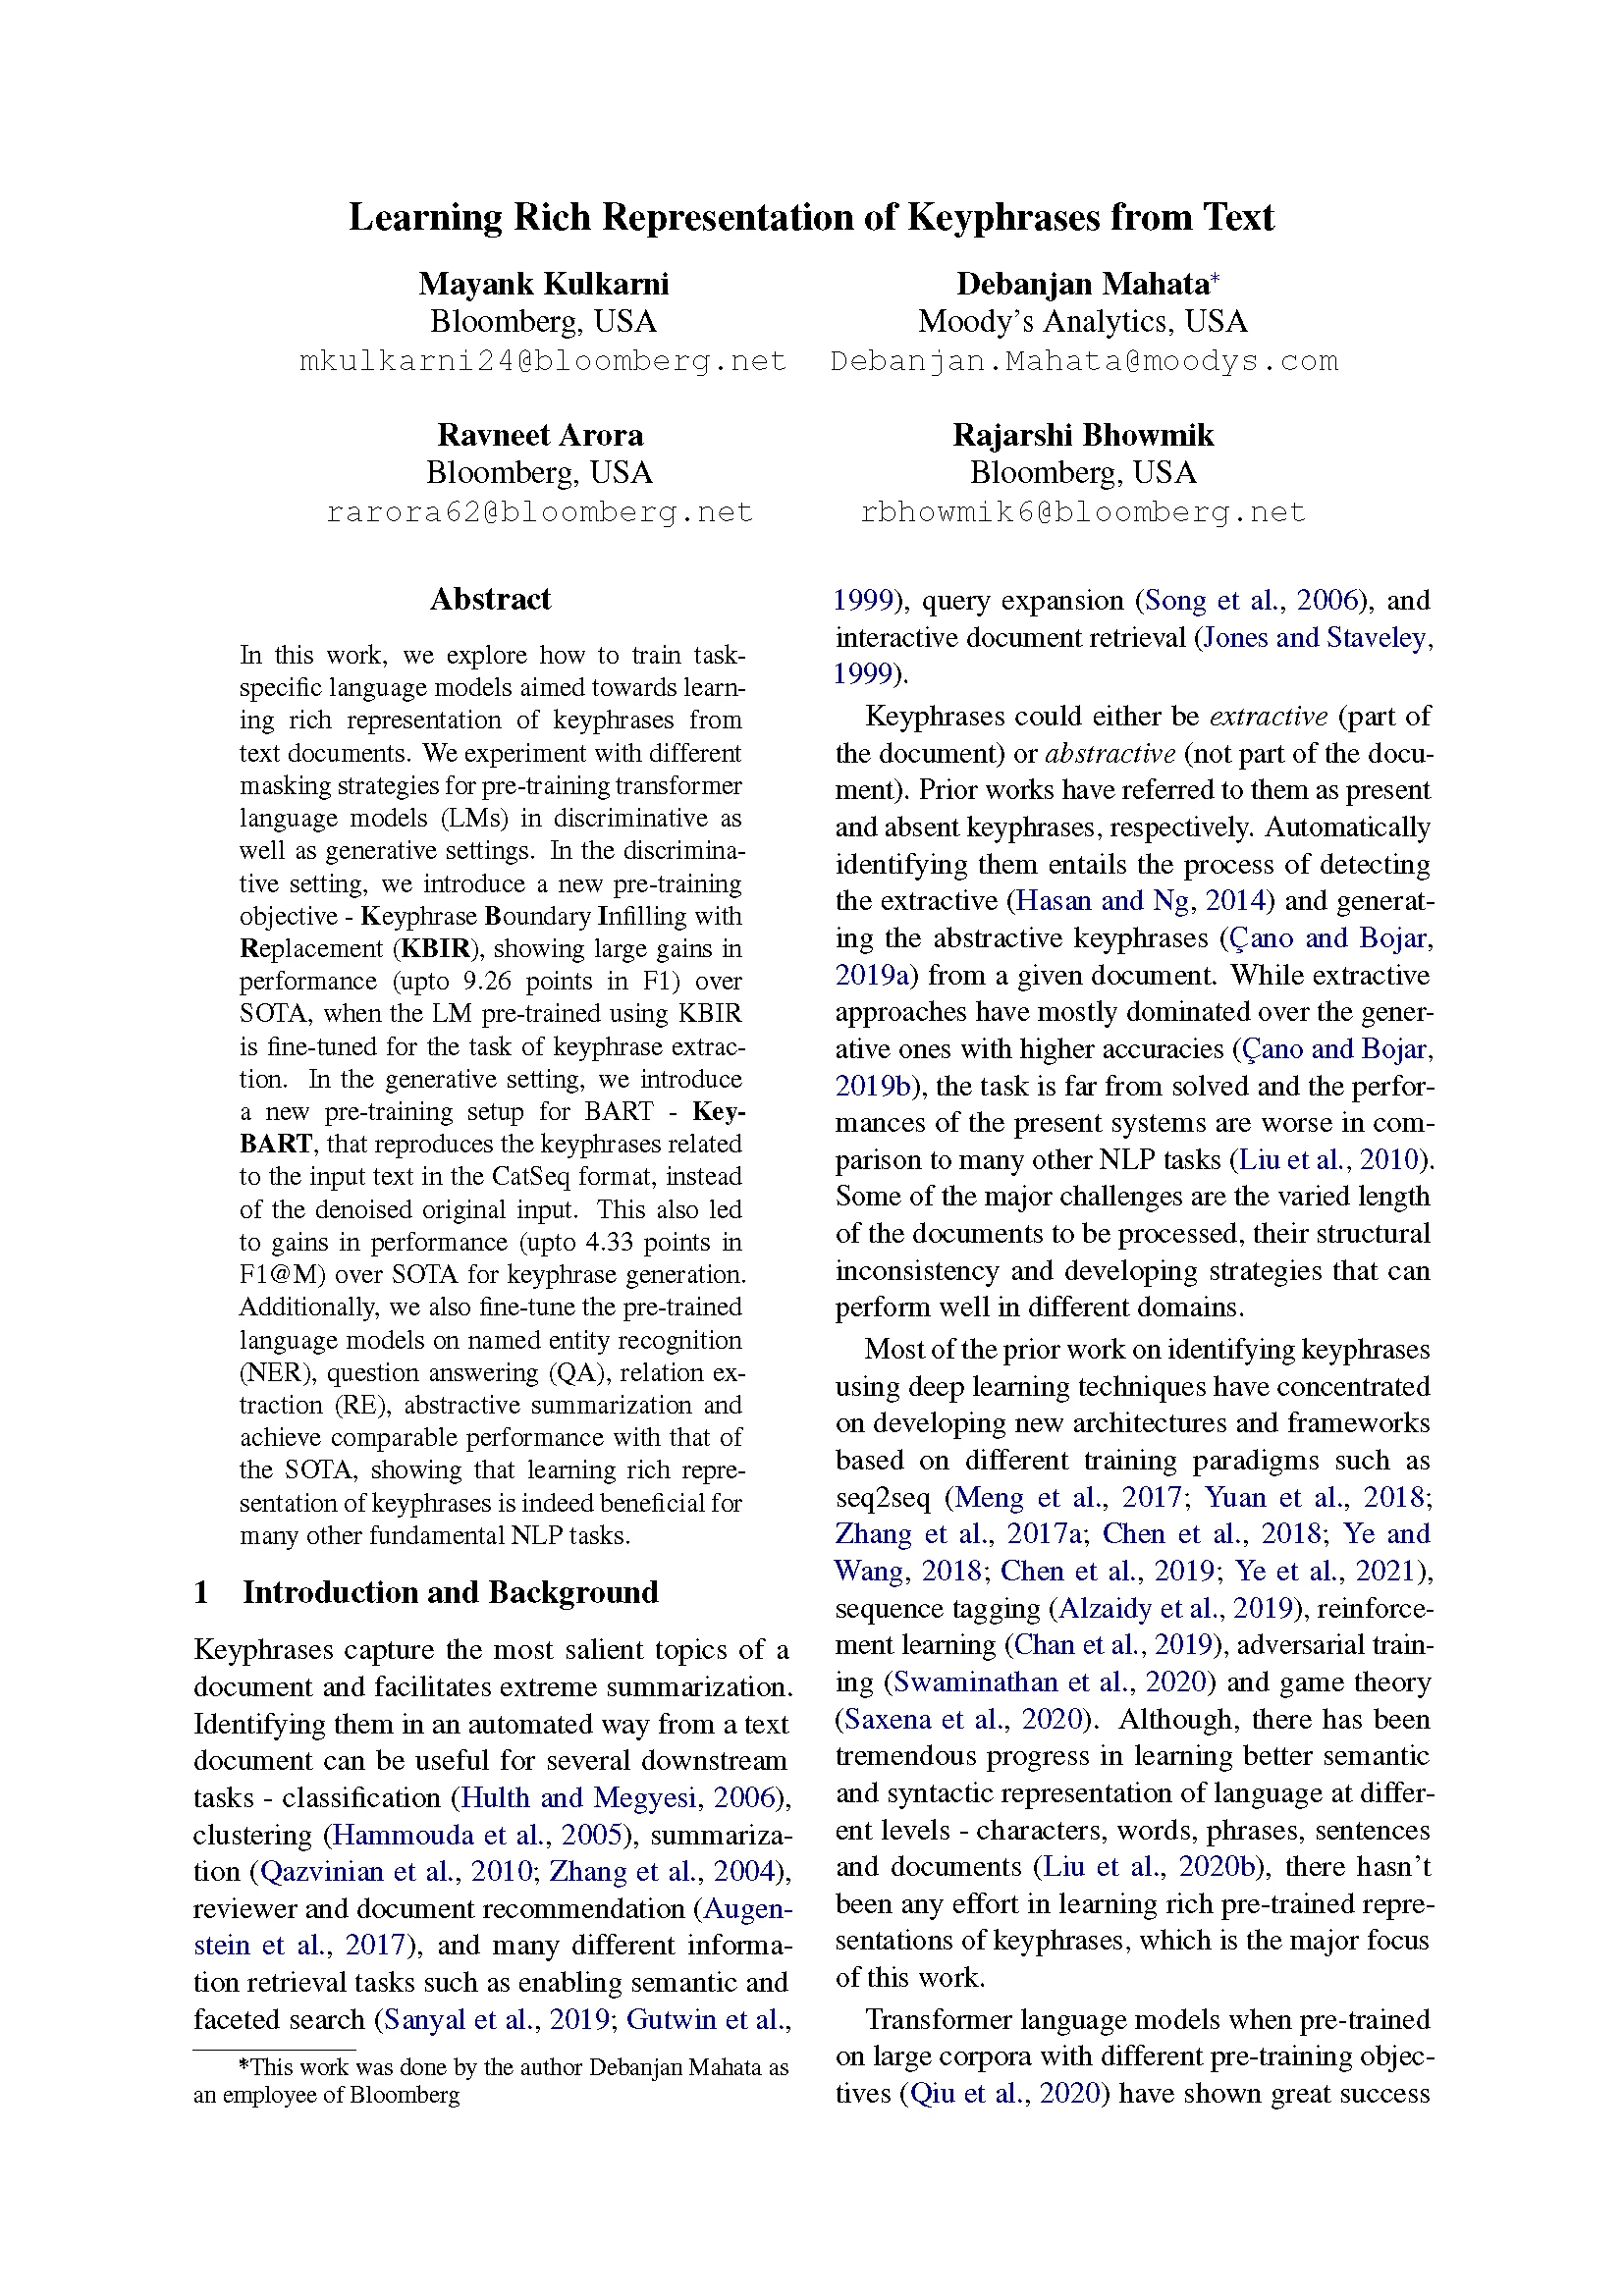 Front page of paper published at NAACL 2022 titled "Learning Rich Representation of Keyphrases from Text"